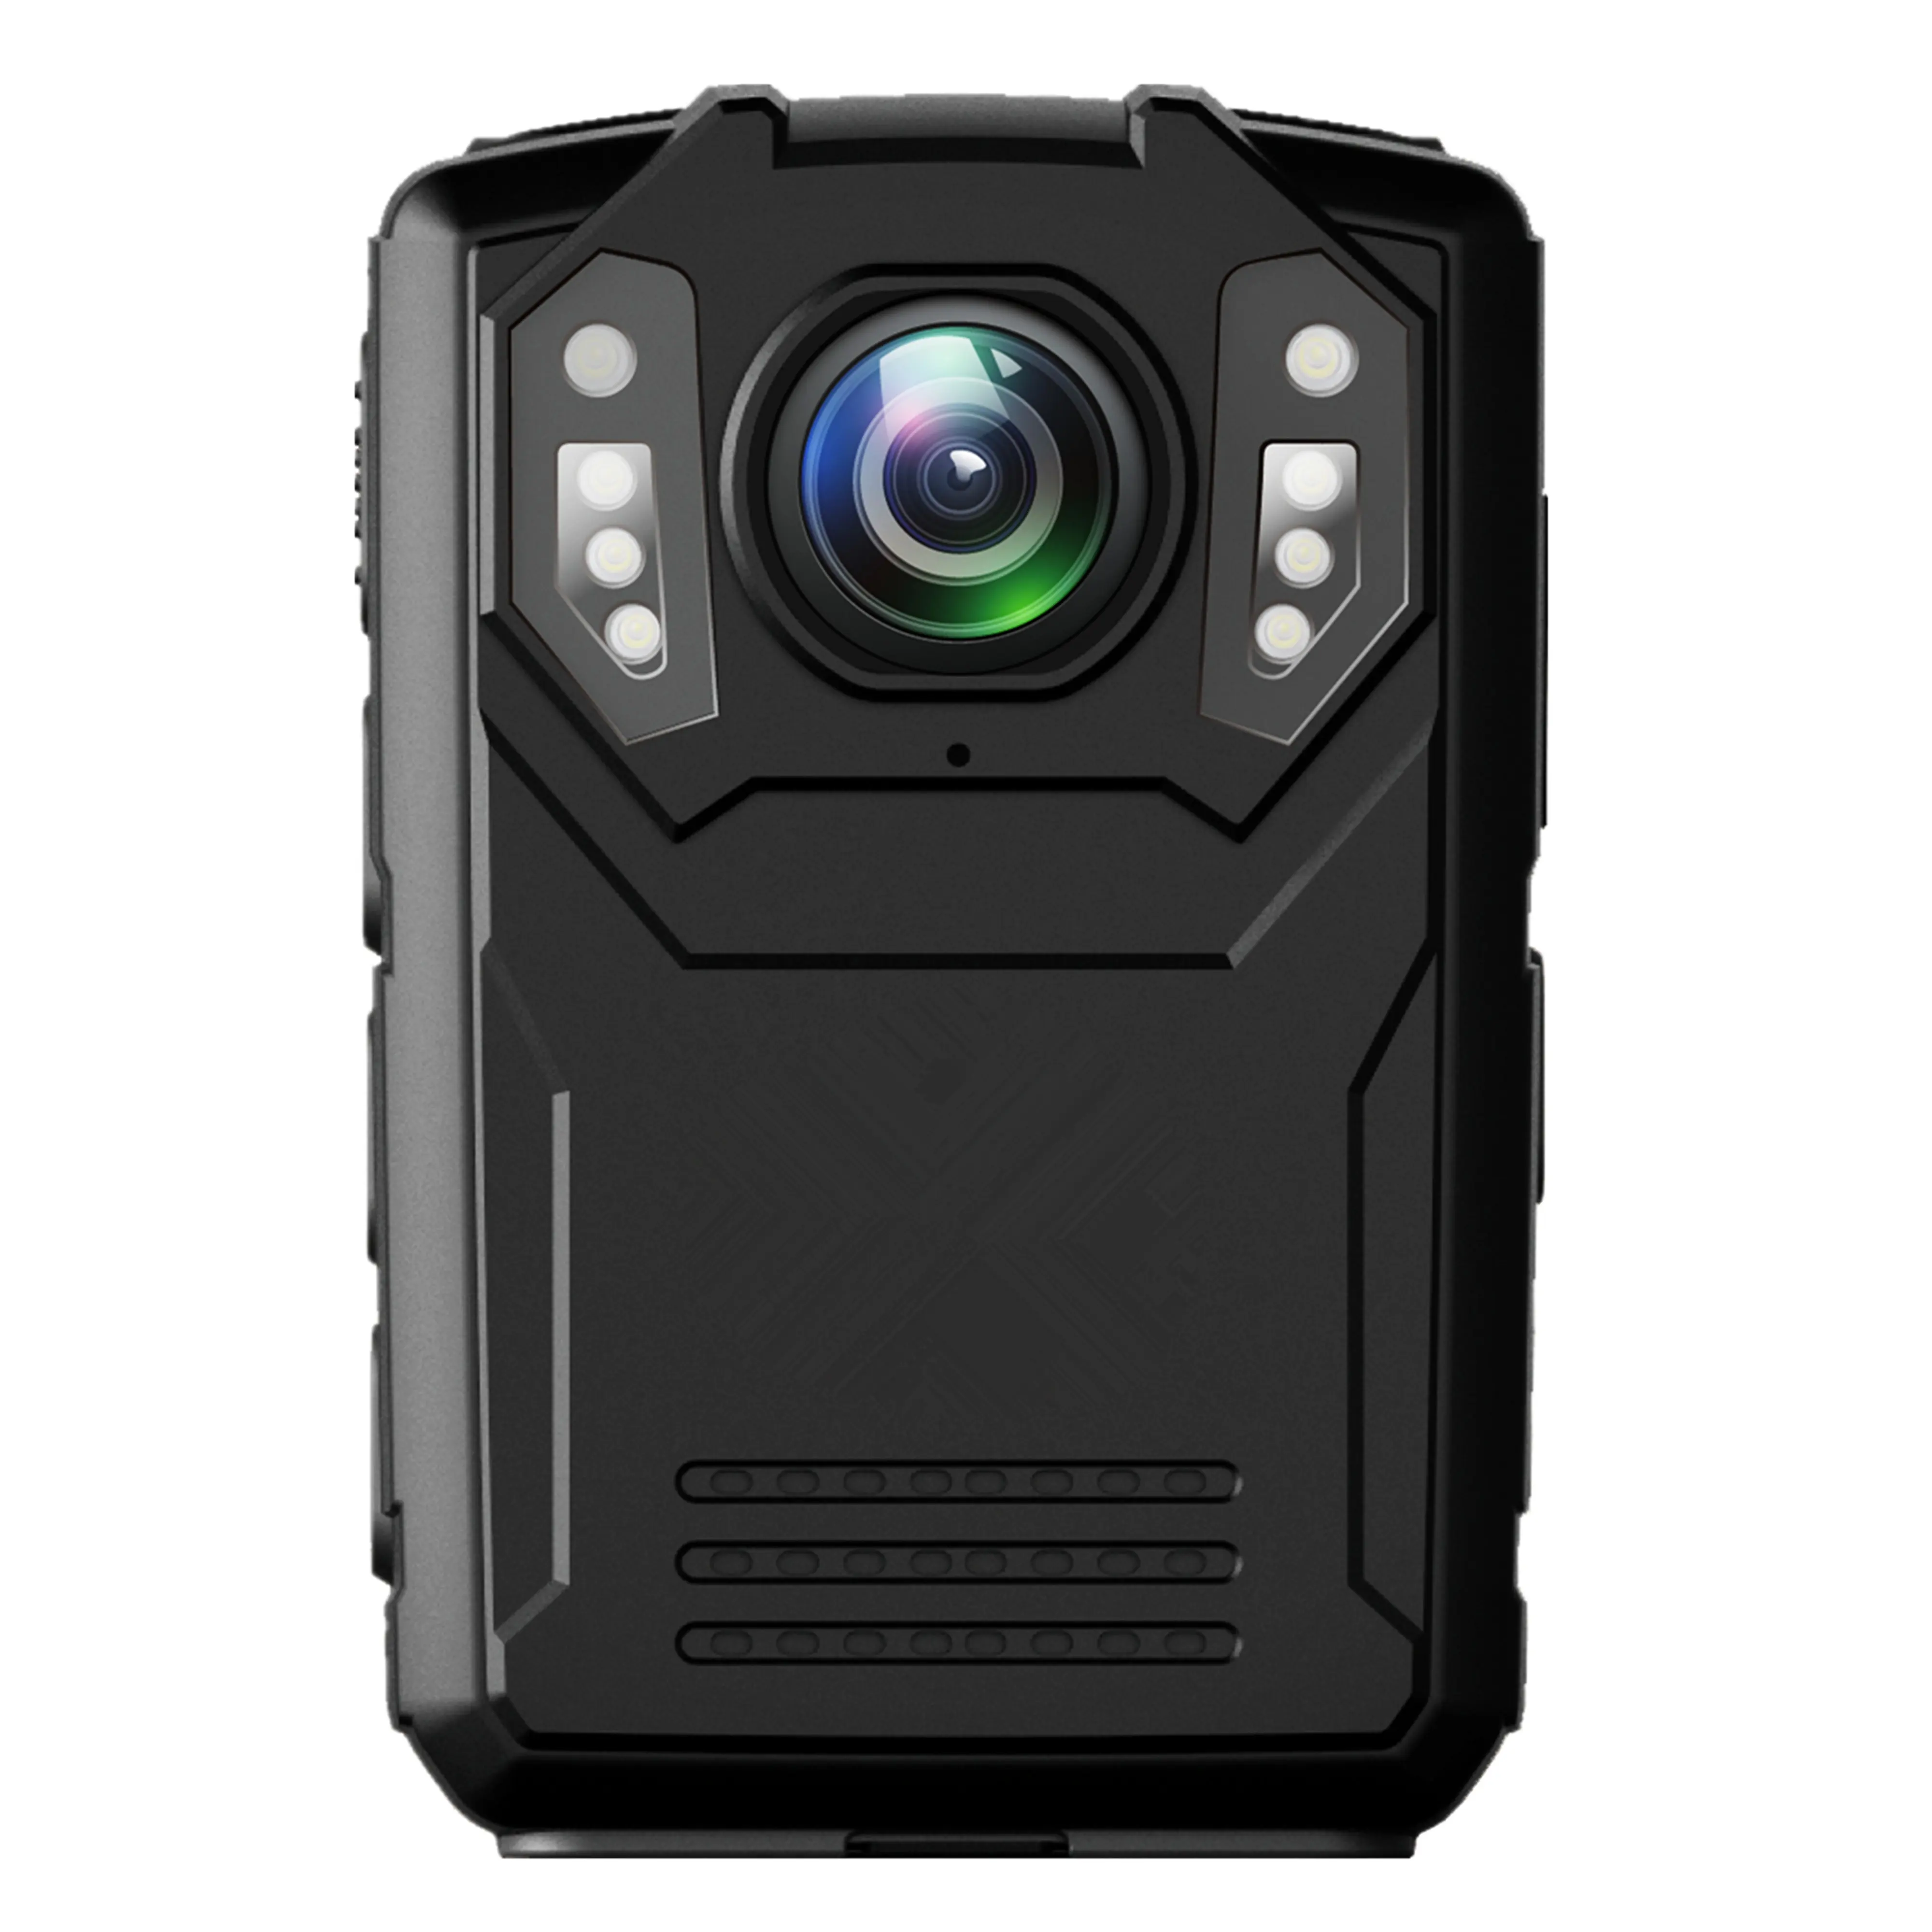 Dean NG 4G live broadcast waterproof 1512P video recording GPS security traffic group talking body worn camera